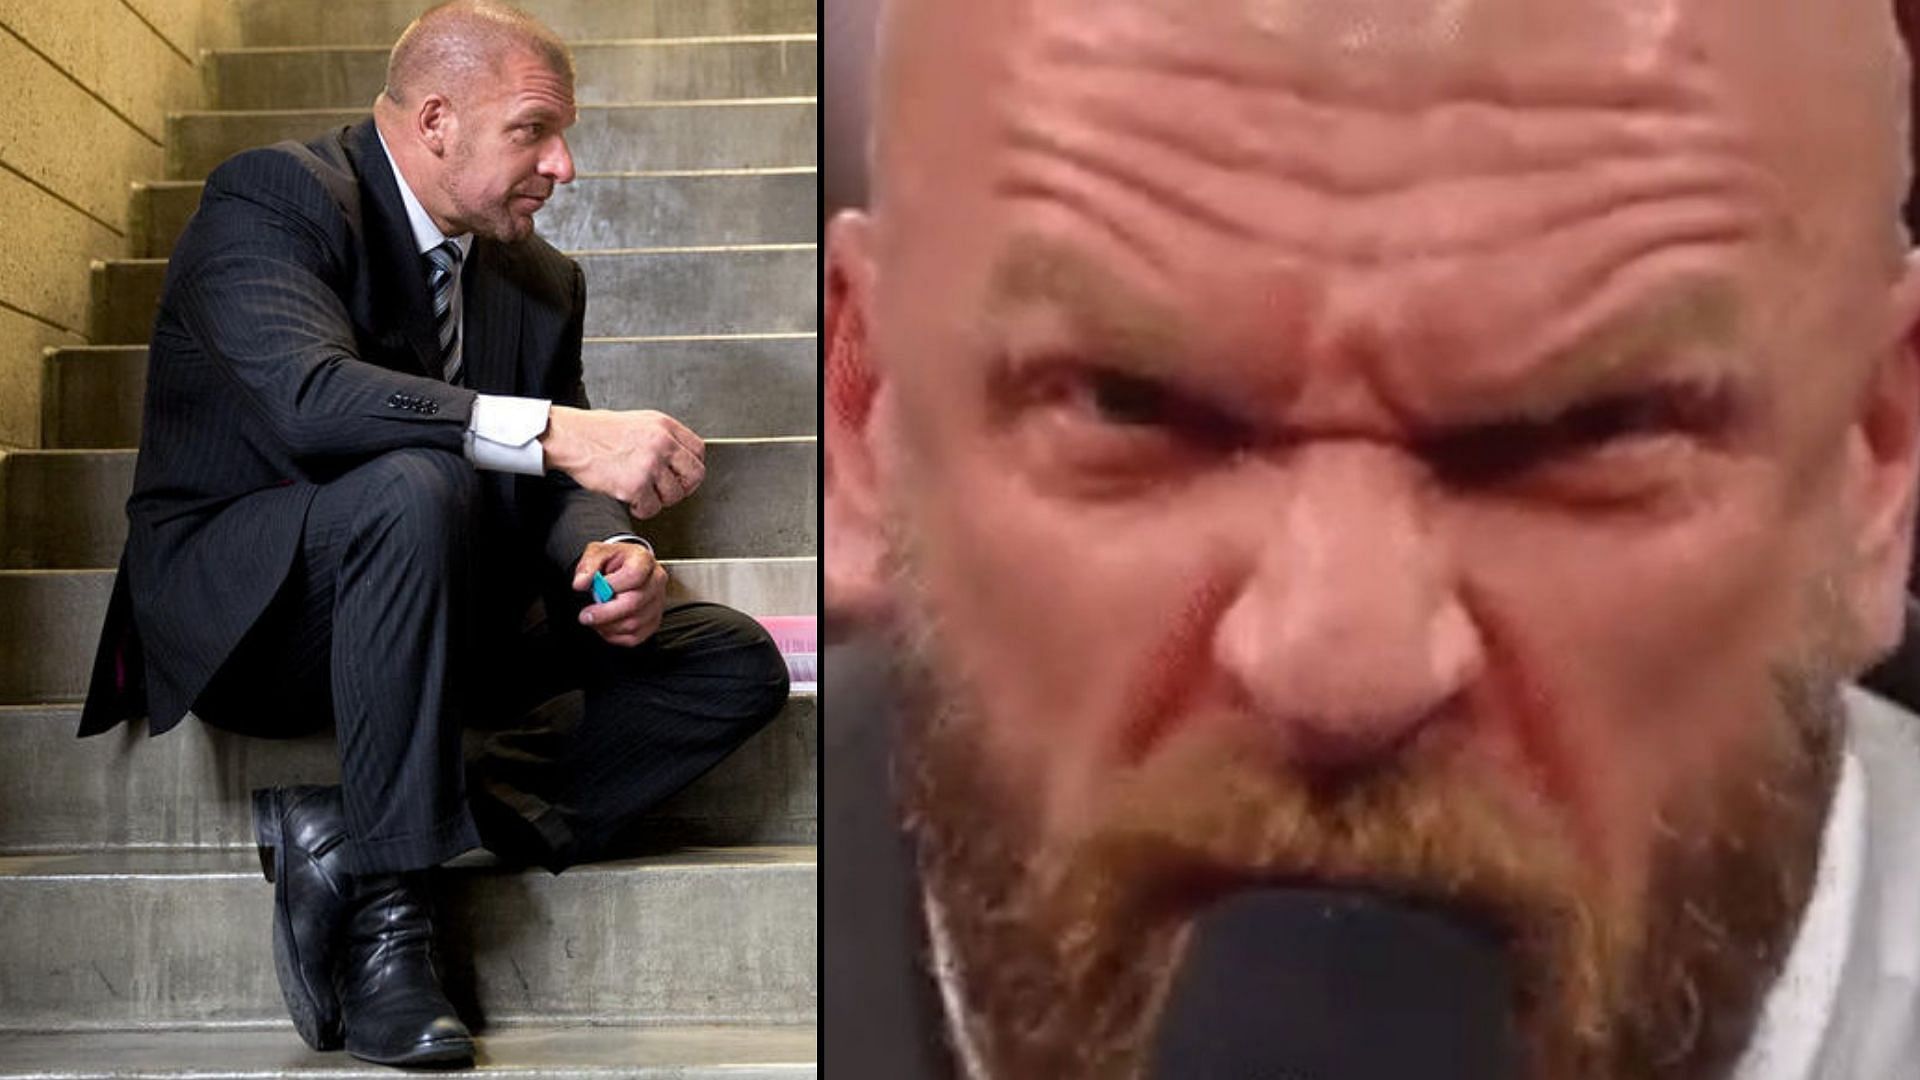 Triple H has his work cut out for him